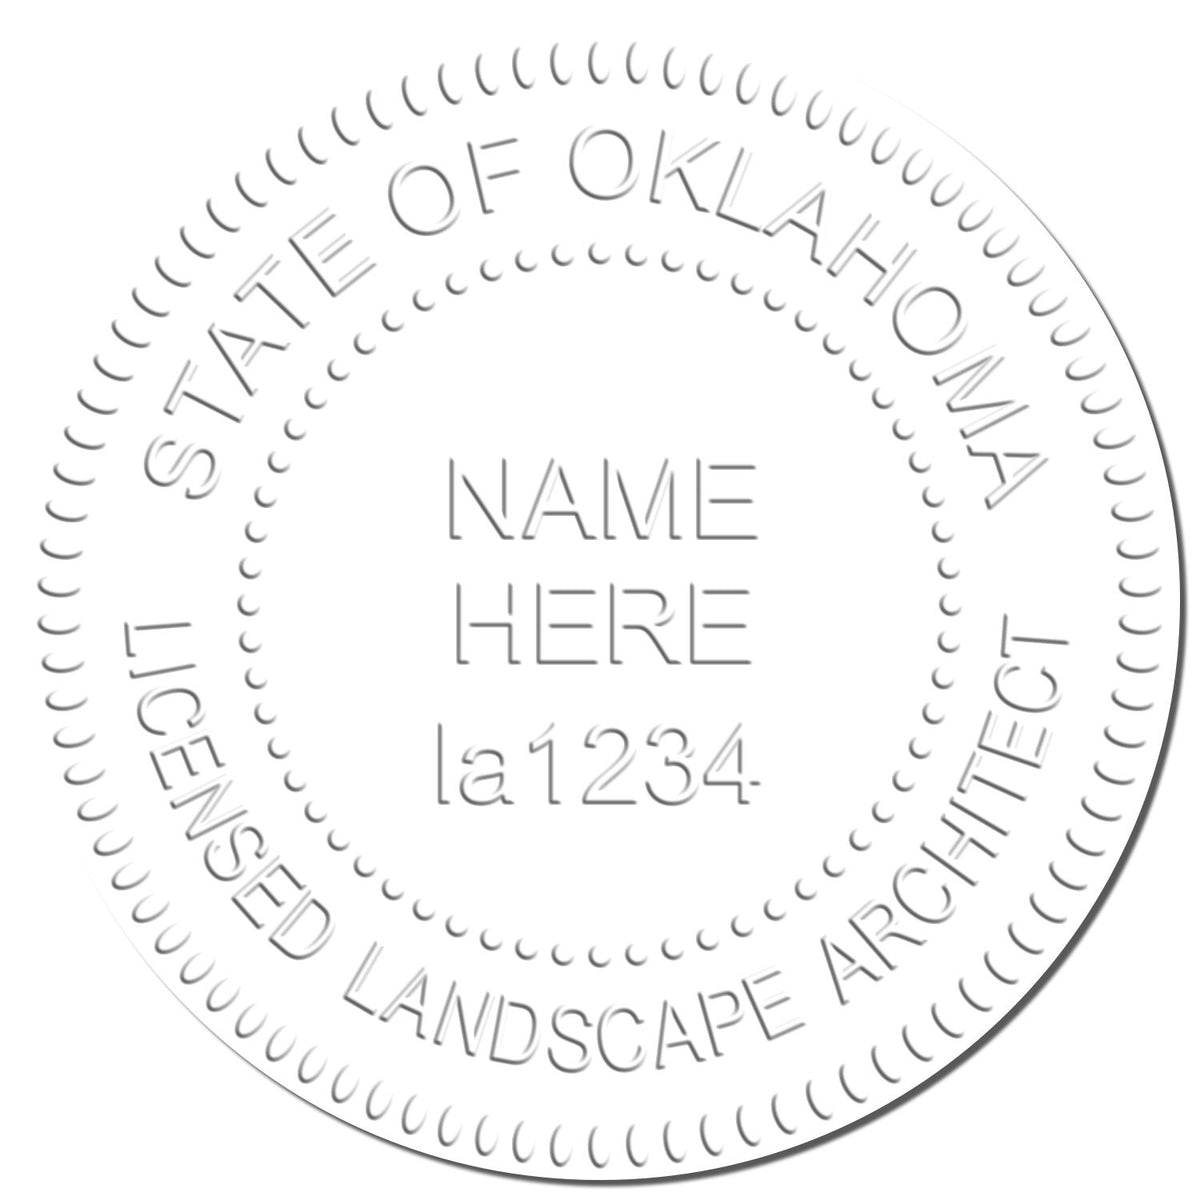 This paper is stamped with a sample imprint of the Soft Pocket Oklahoma Landscape Architect Embosser, signifying its quality and reliability.